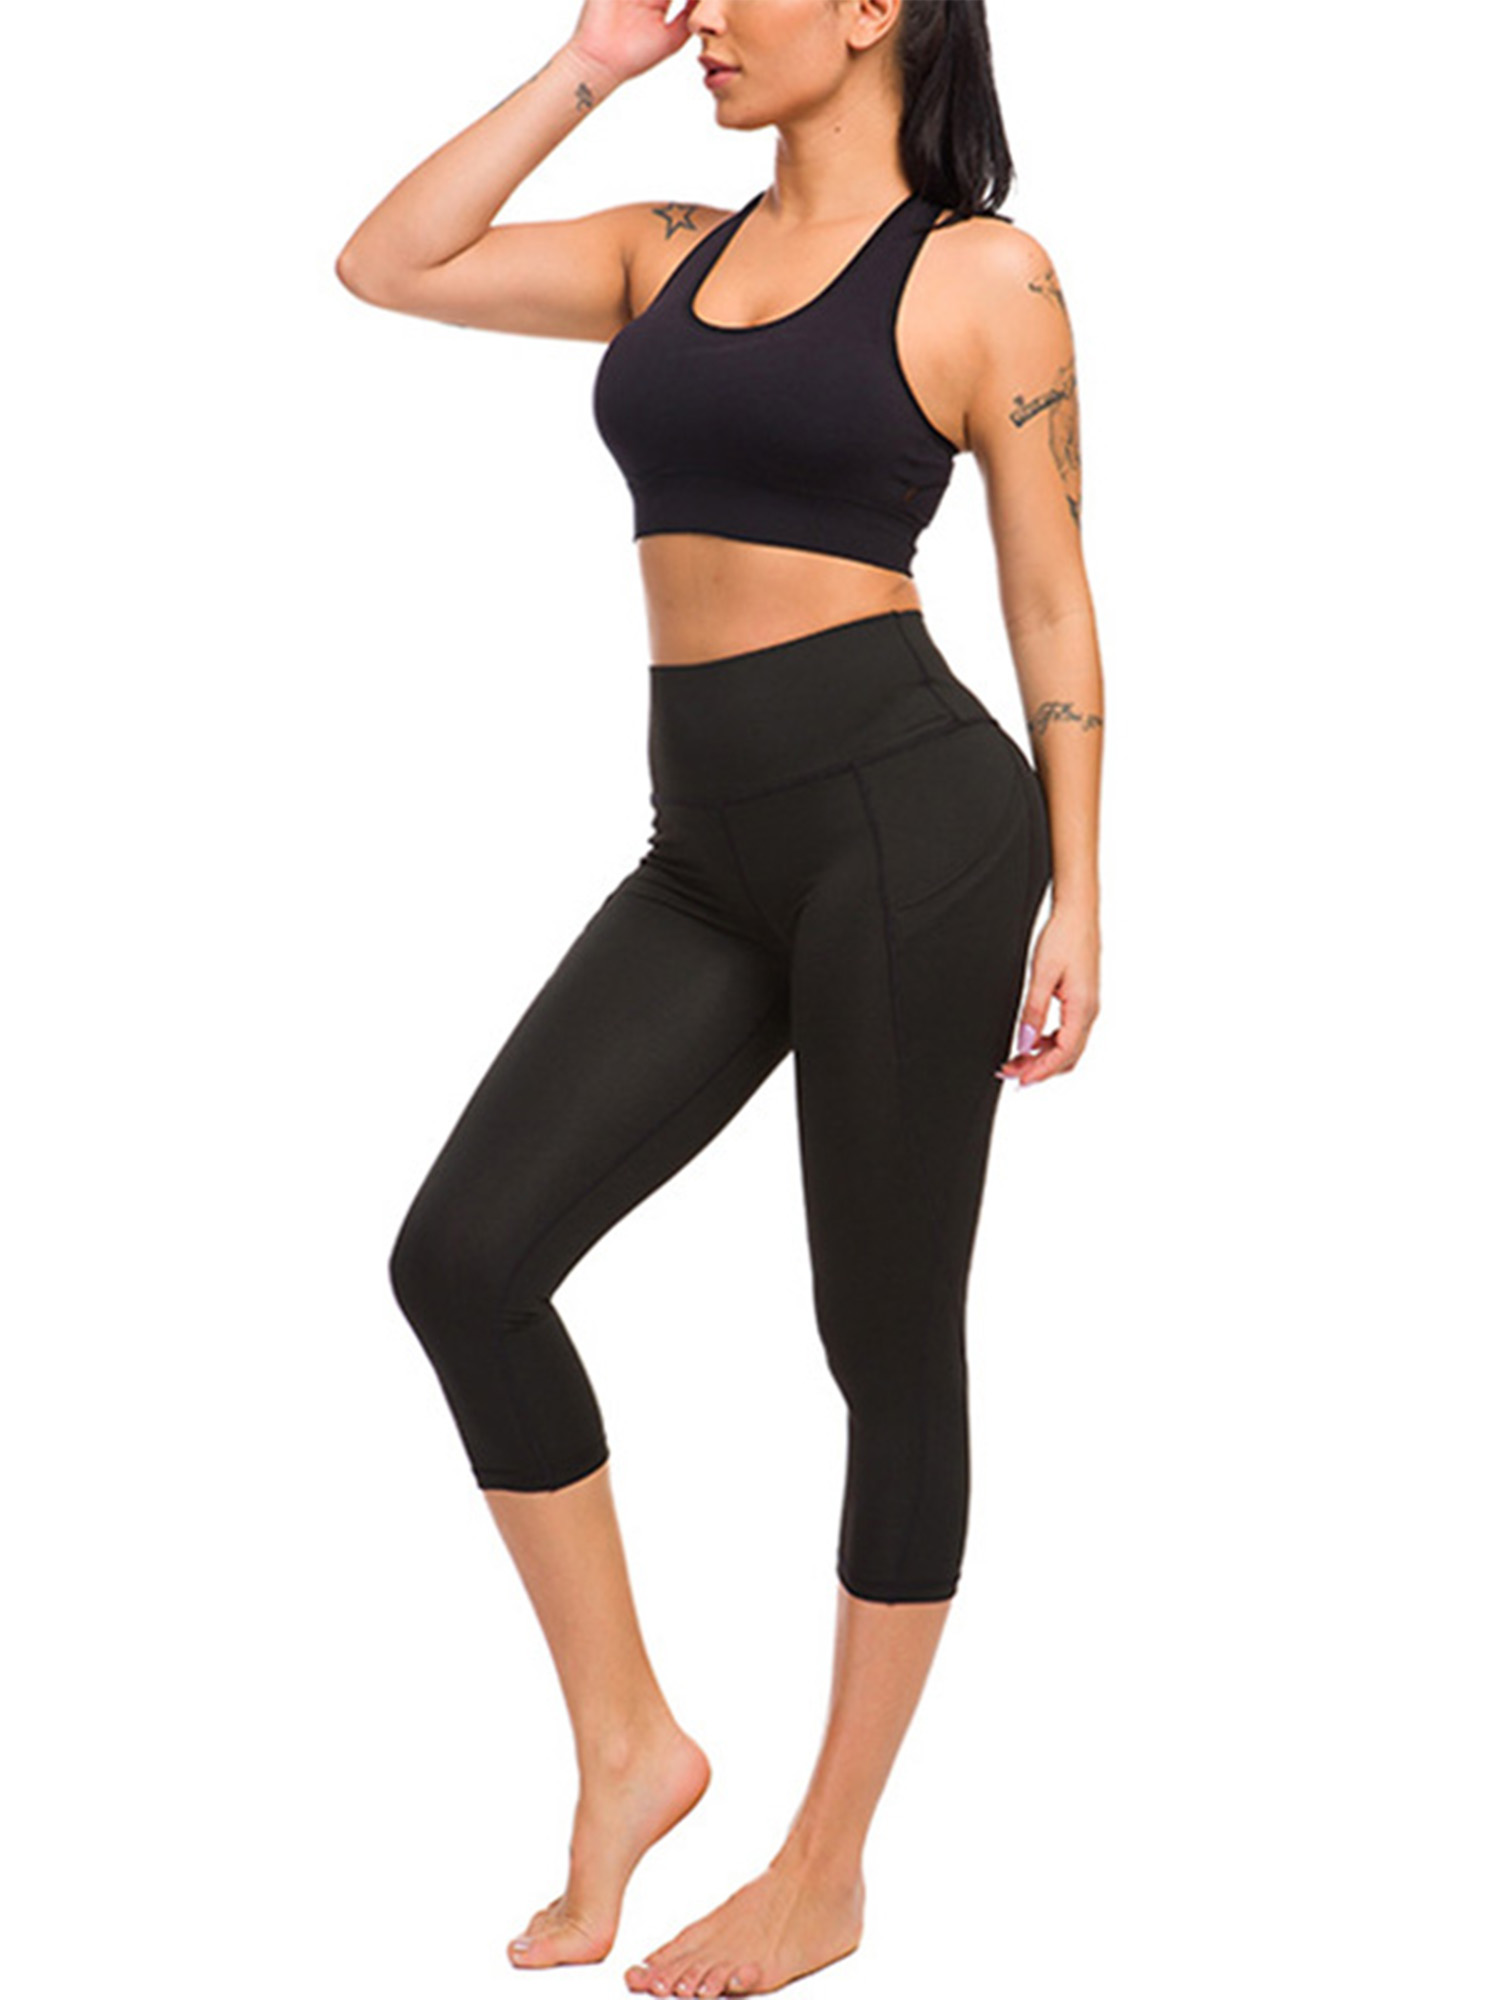 MAWCLOS 2psc Women Capri Leggings Tights Tummy Conytol High Waist Cropped Yoga Pants for Running Fitness with Pocket - image 7 of 8